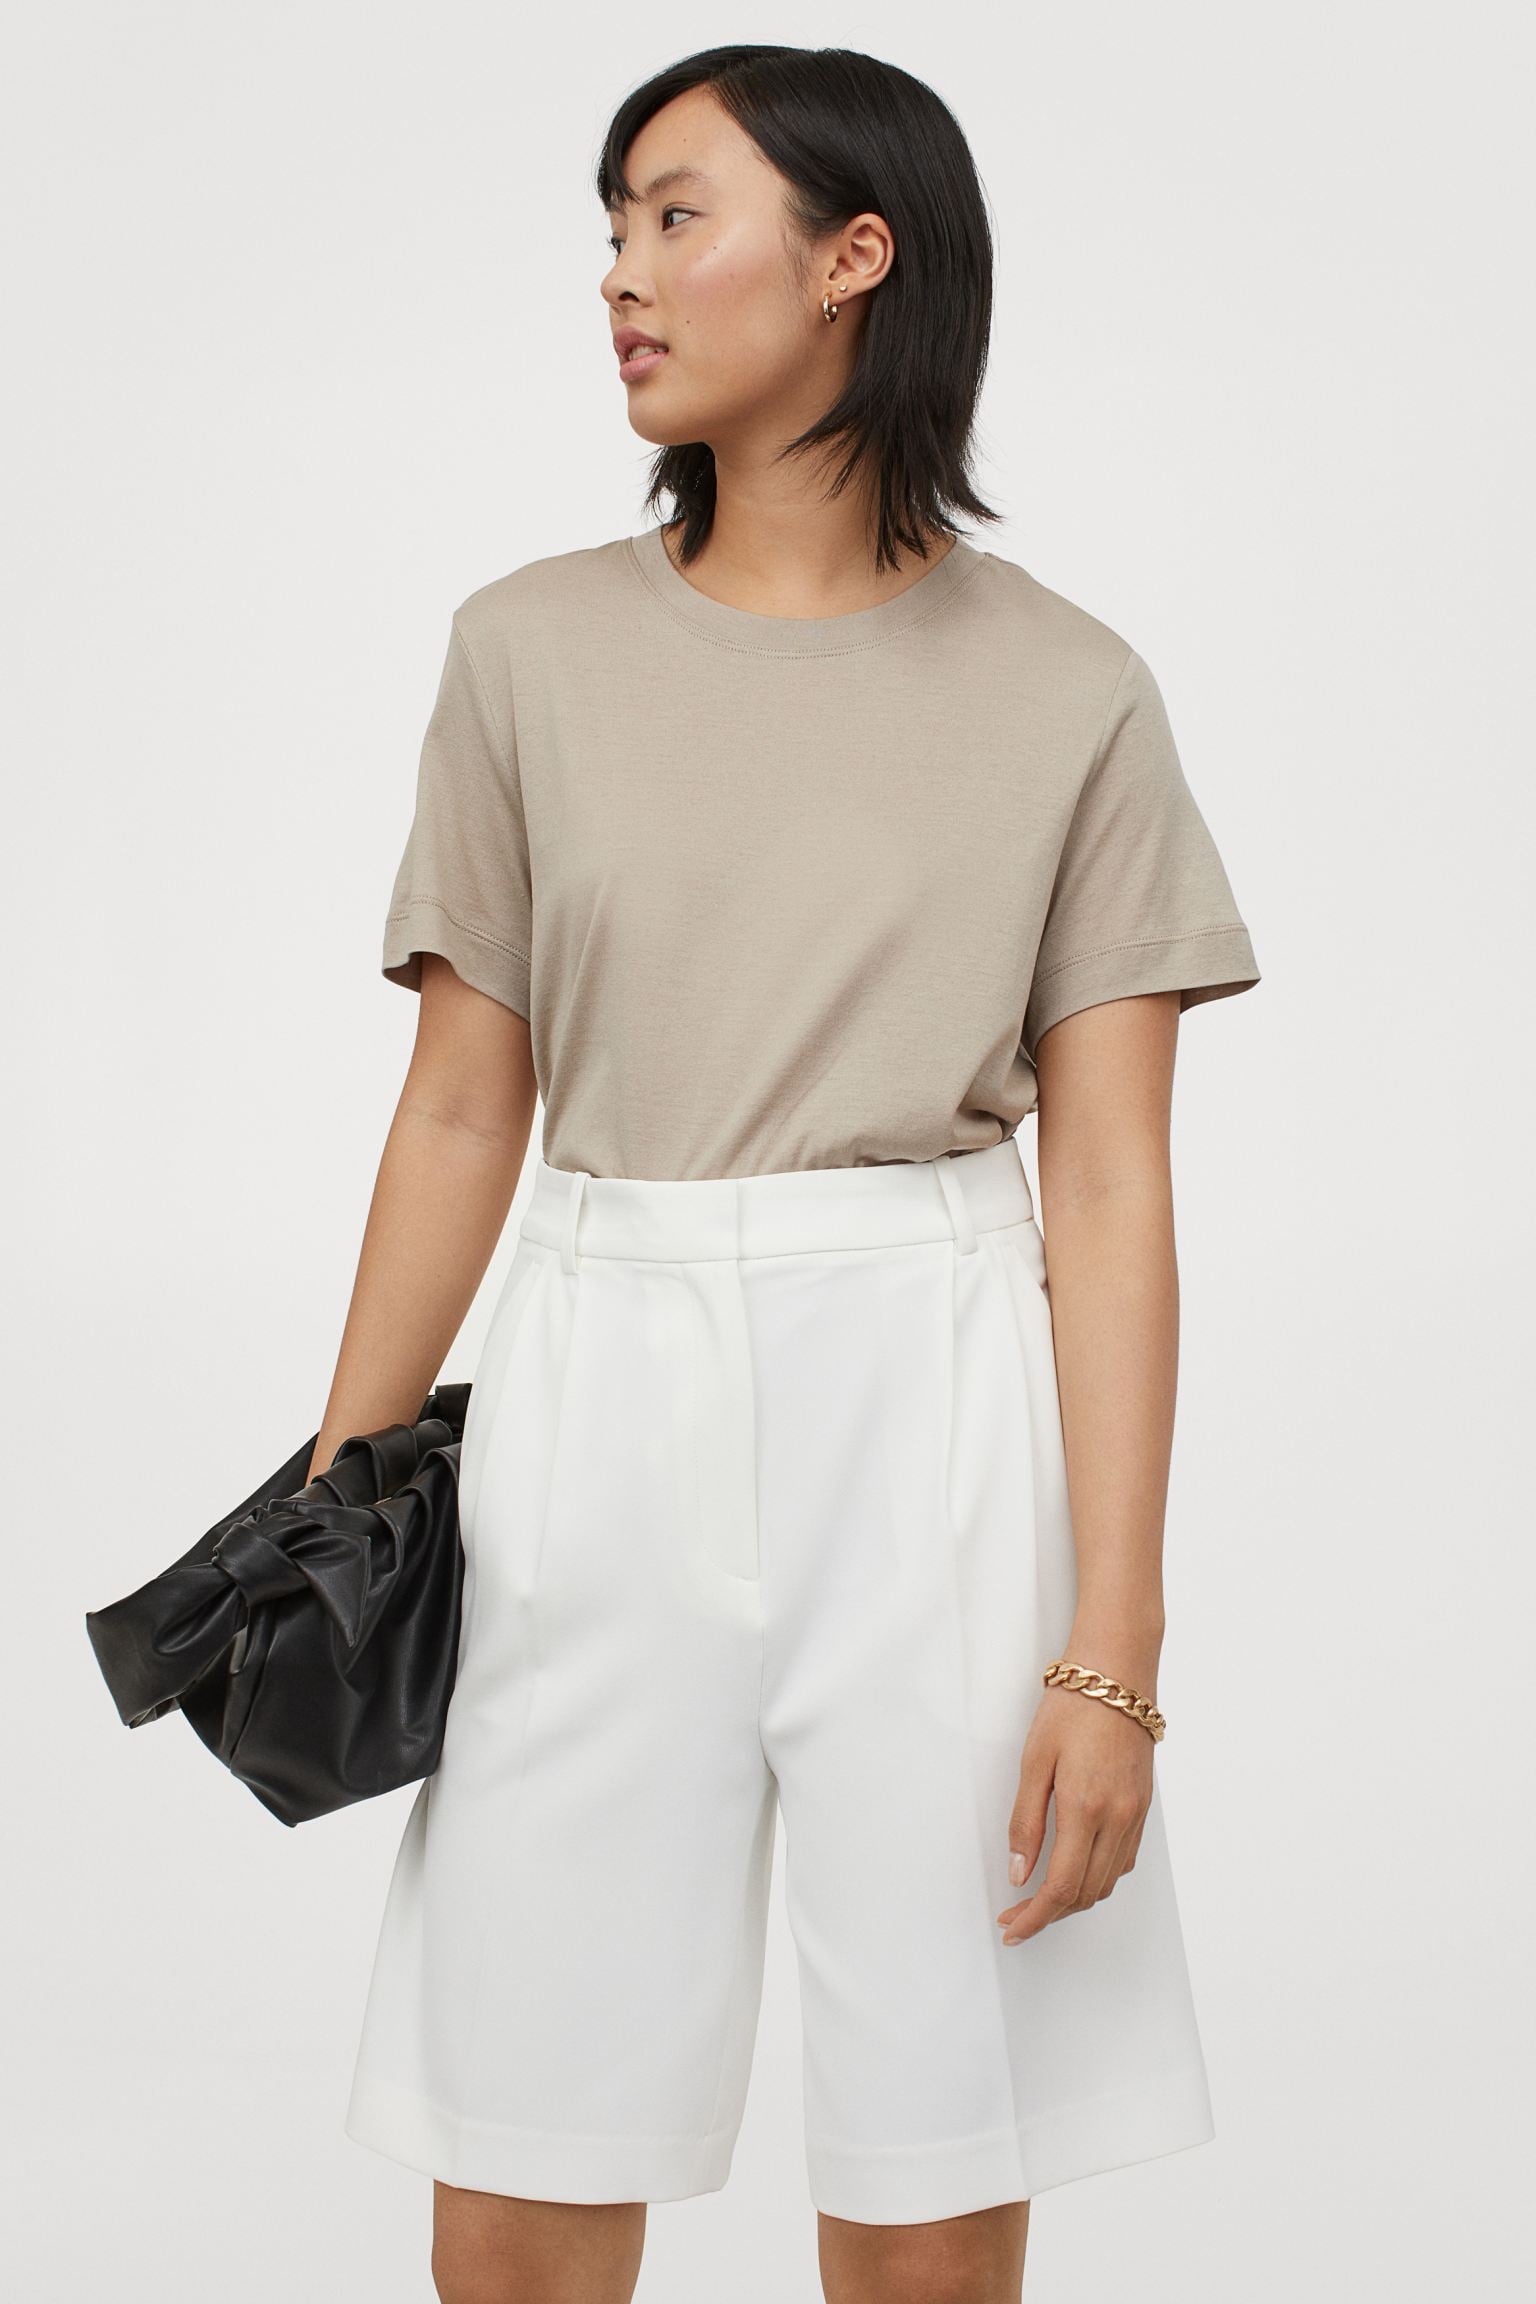 White Bermuda Shorts | 19 Stylish Pairs of H&M Shorts, Because Spring Is Here and We've Been Ready | POPSUGAR Fashion 2